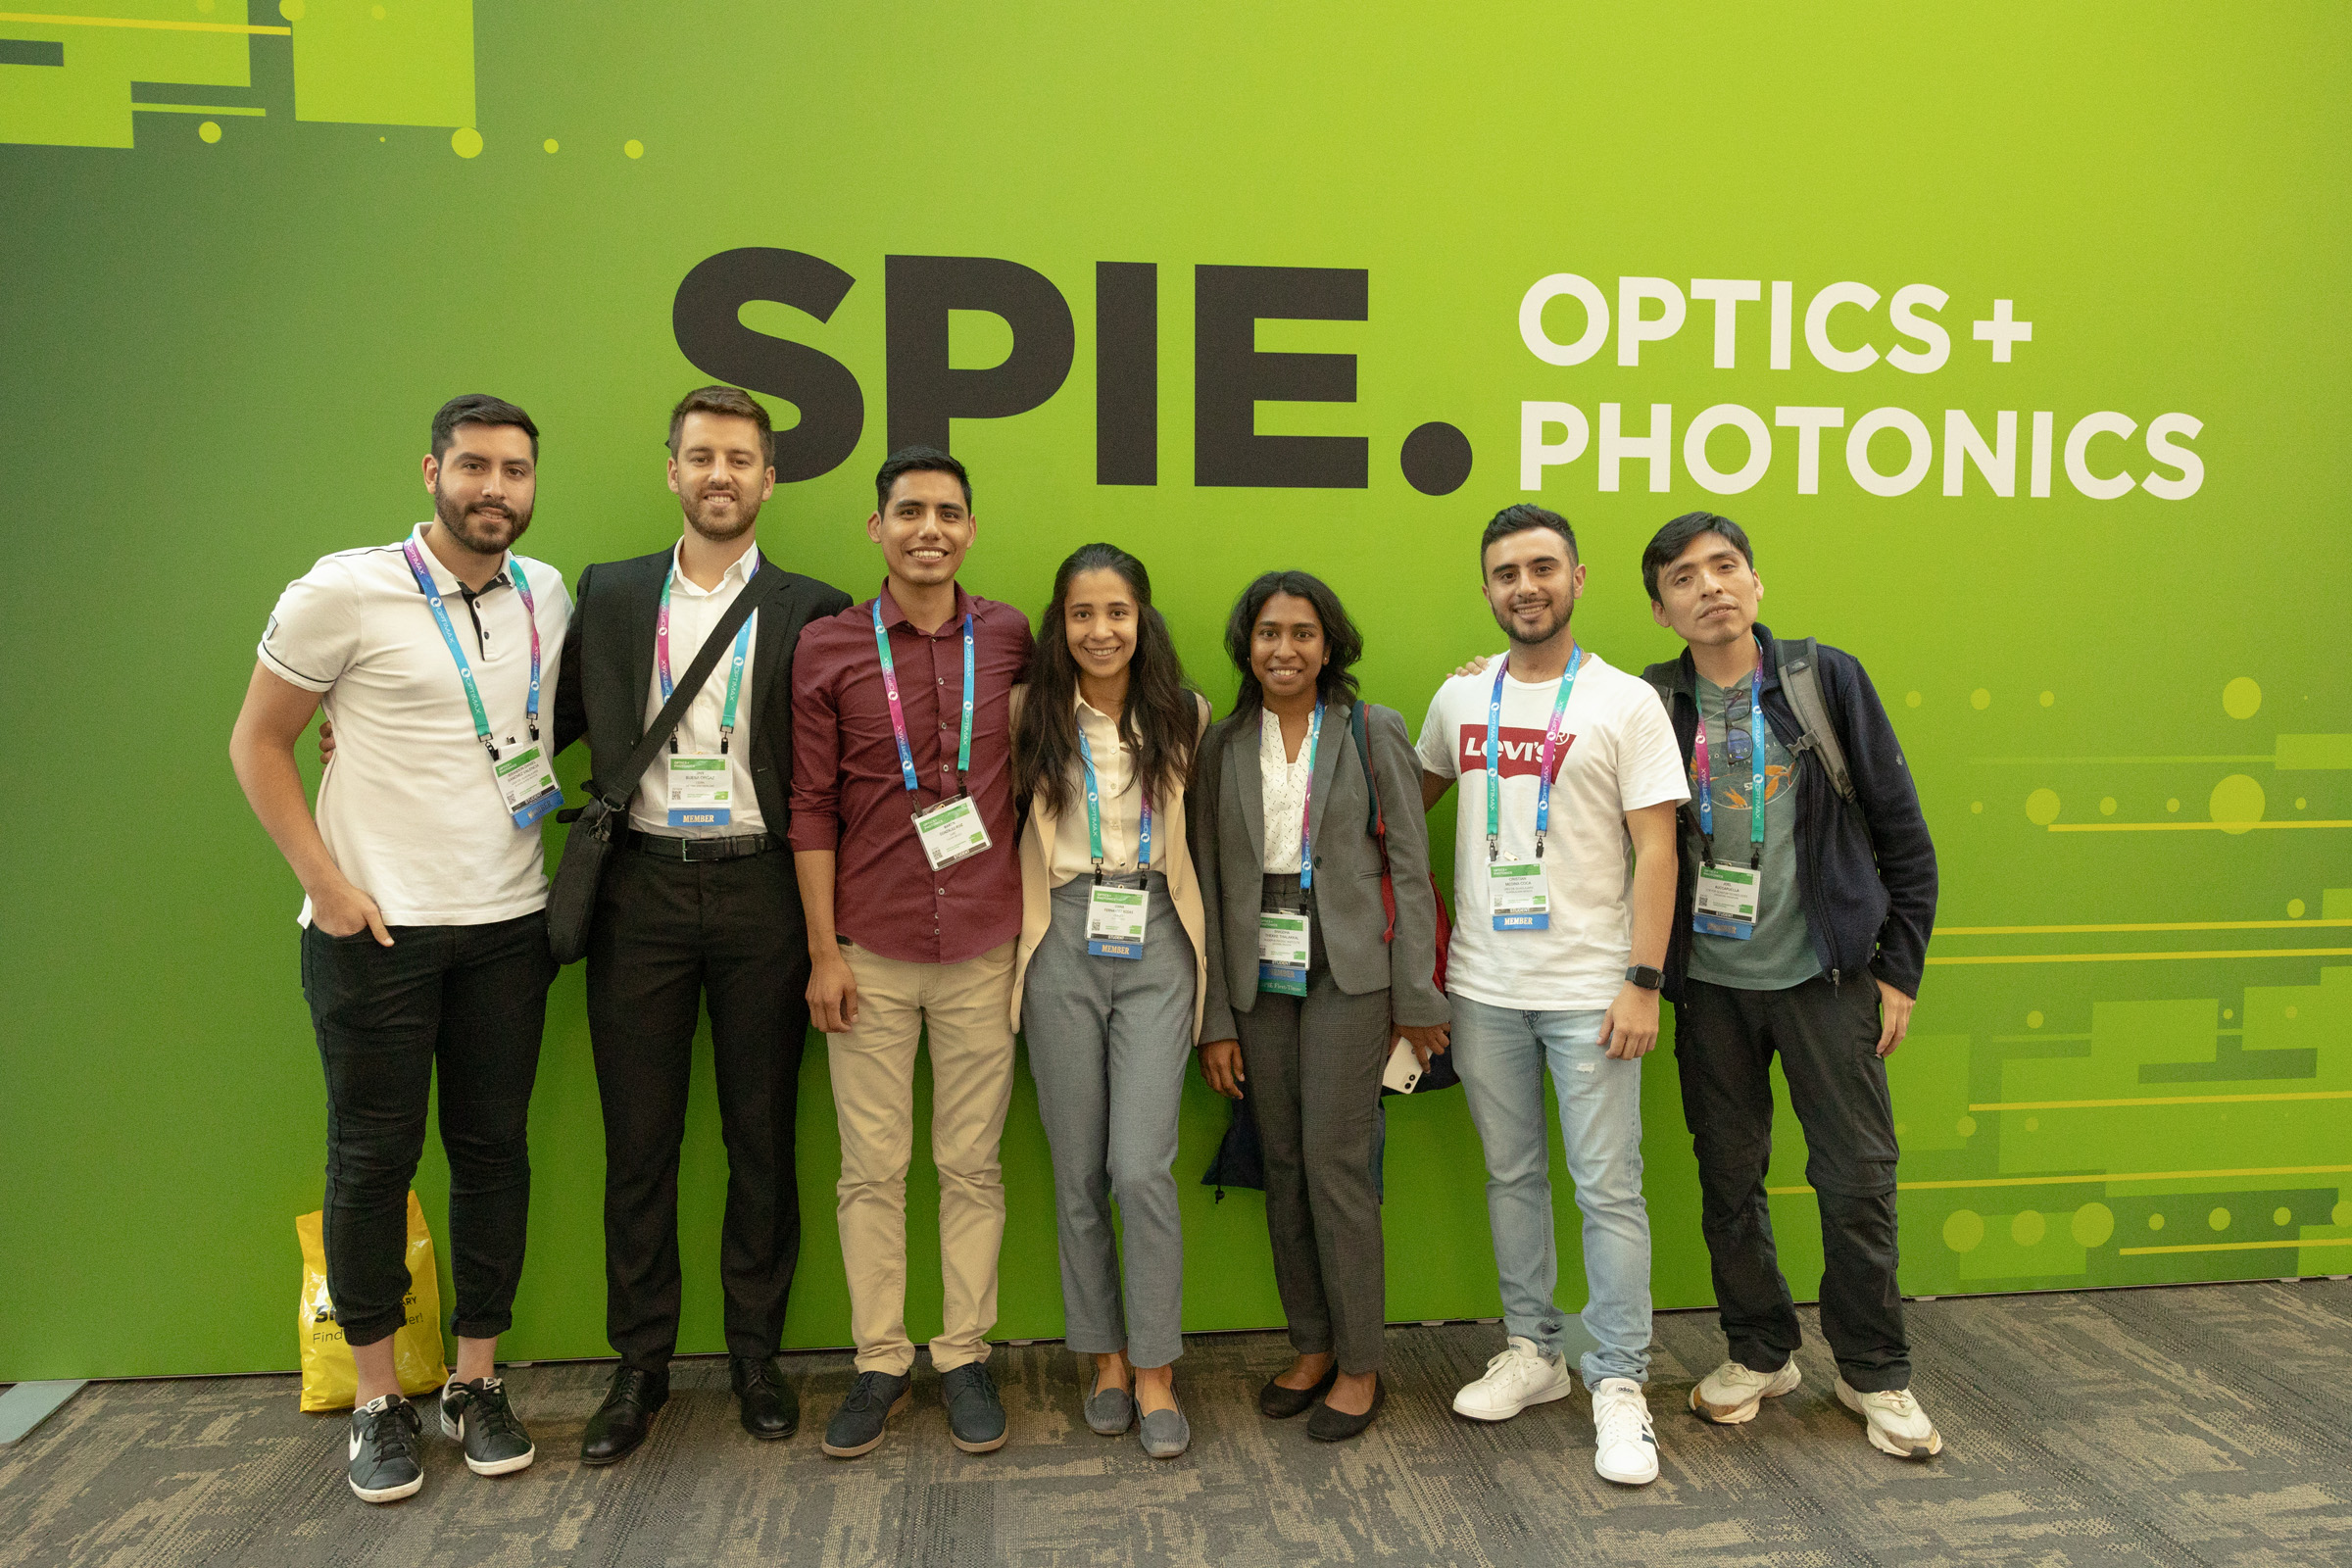 Attendees gathering for a photo-op at SPIE Optics + Photonics